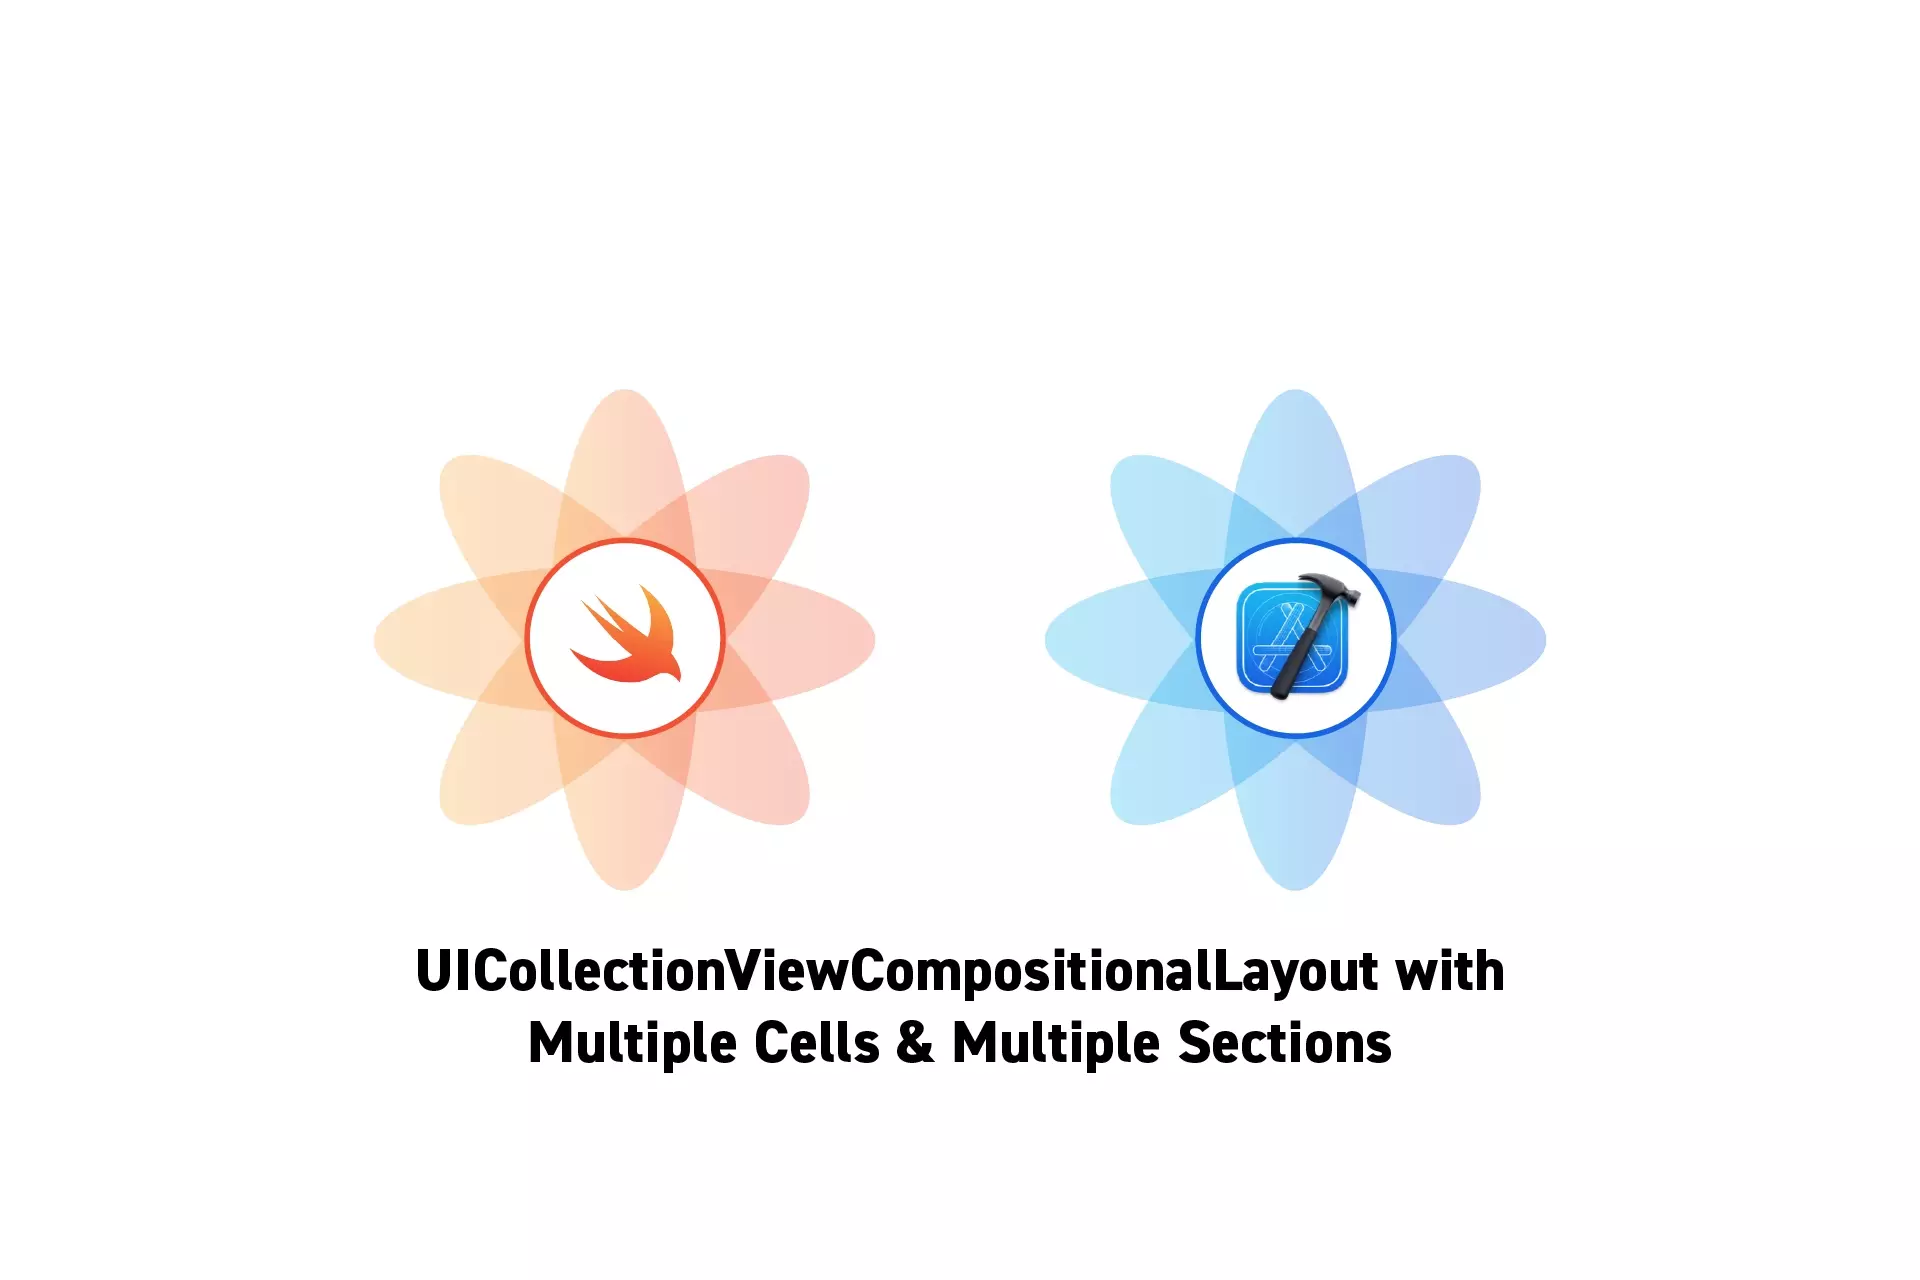 Two flowers that represent Swift and XCode side by side. Beneath them sits the text "UICollectionViewCompositionalLayout with Multiple Cells & Multiple Sections."